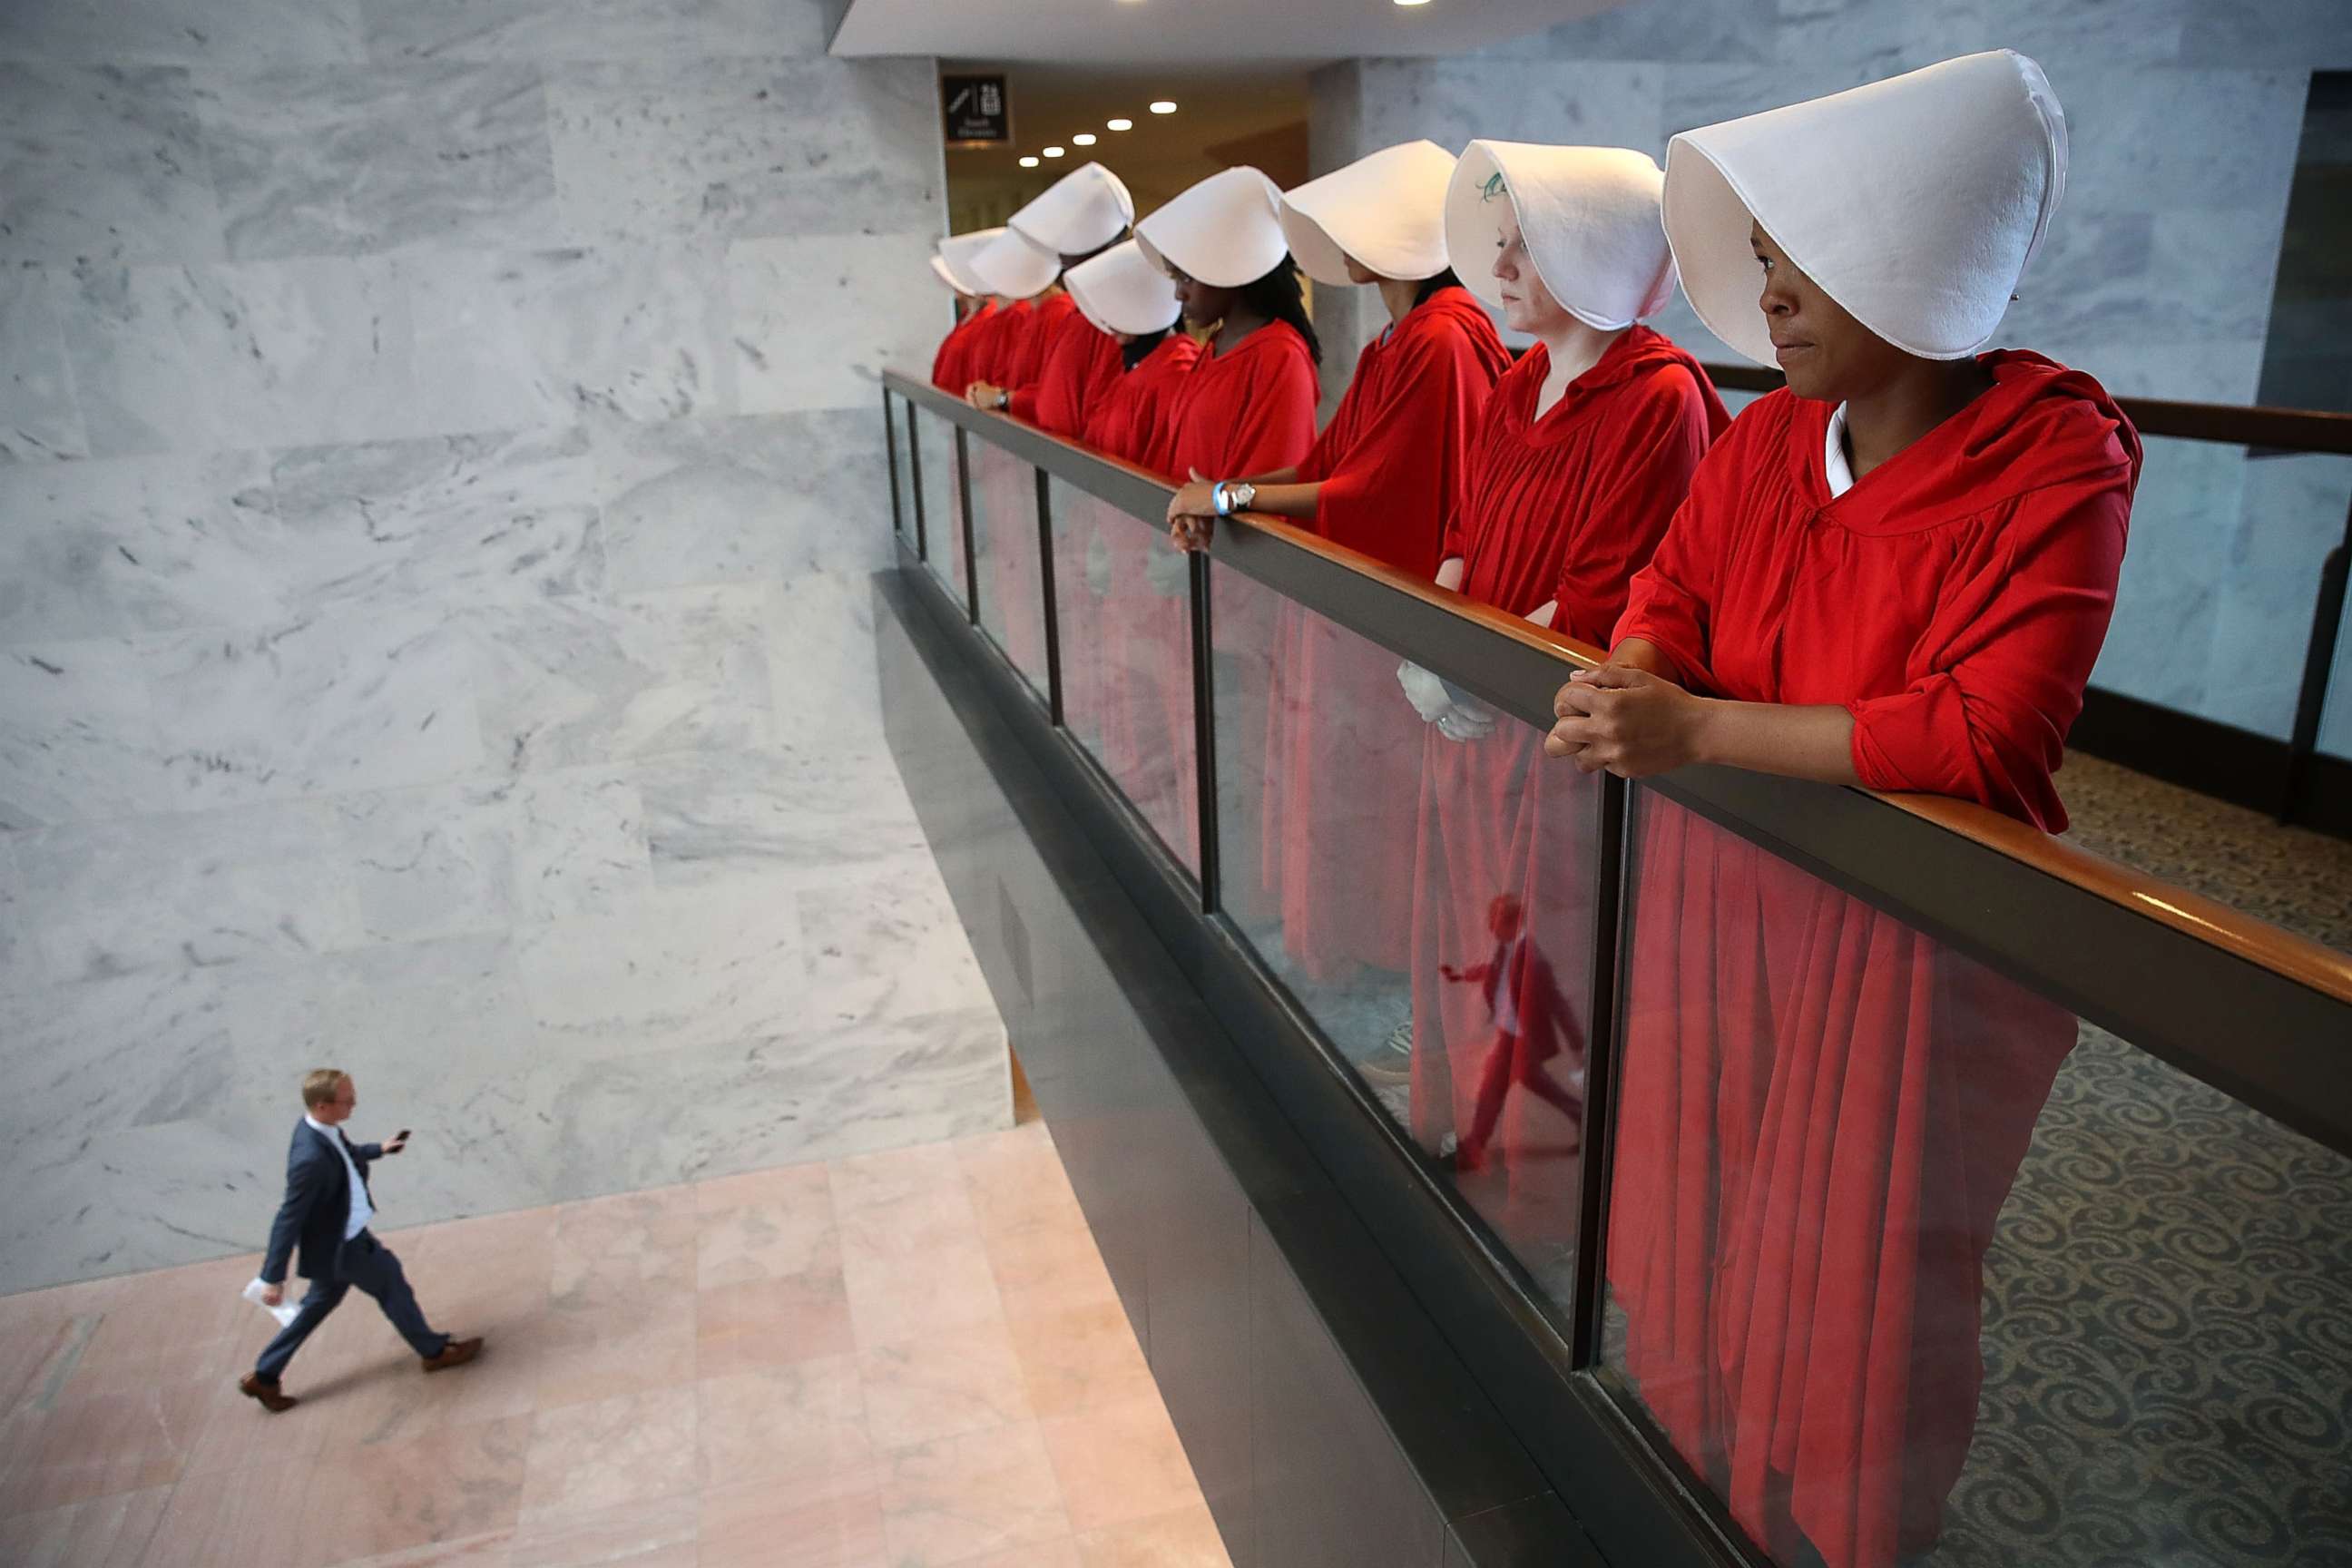 PHOTO: Protesters dressed in The Handmaid's Tale costume, protest outside the hearing room where Supreme Court nominee Judge Brett Kavanaugh will testify before the Senate Judiciary Committee on Capitol Hill, Sept. 4, 2018, in Washington, D.C.